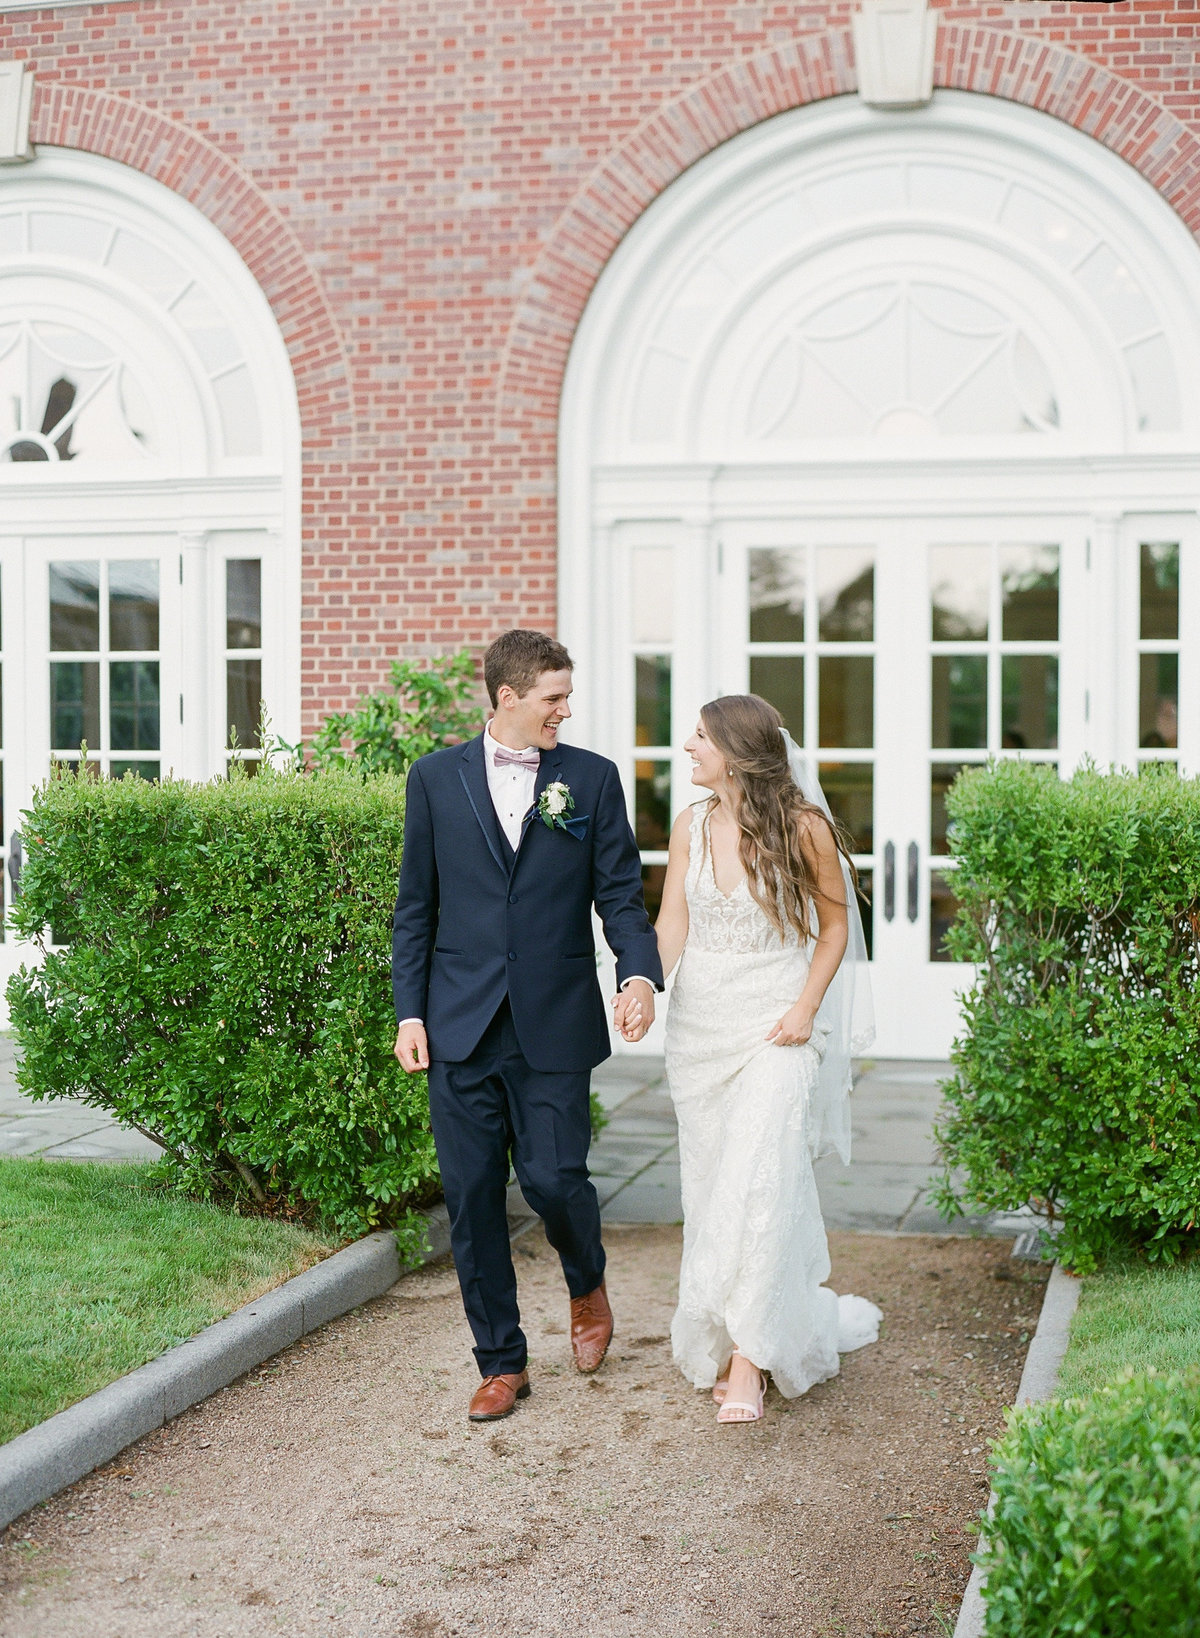 Jacqueline Anne Photography - Chrissy and David-130